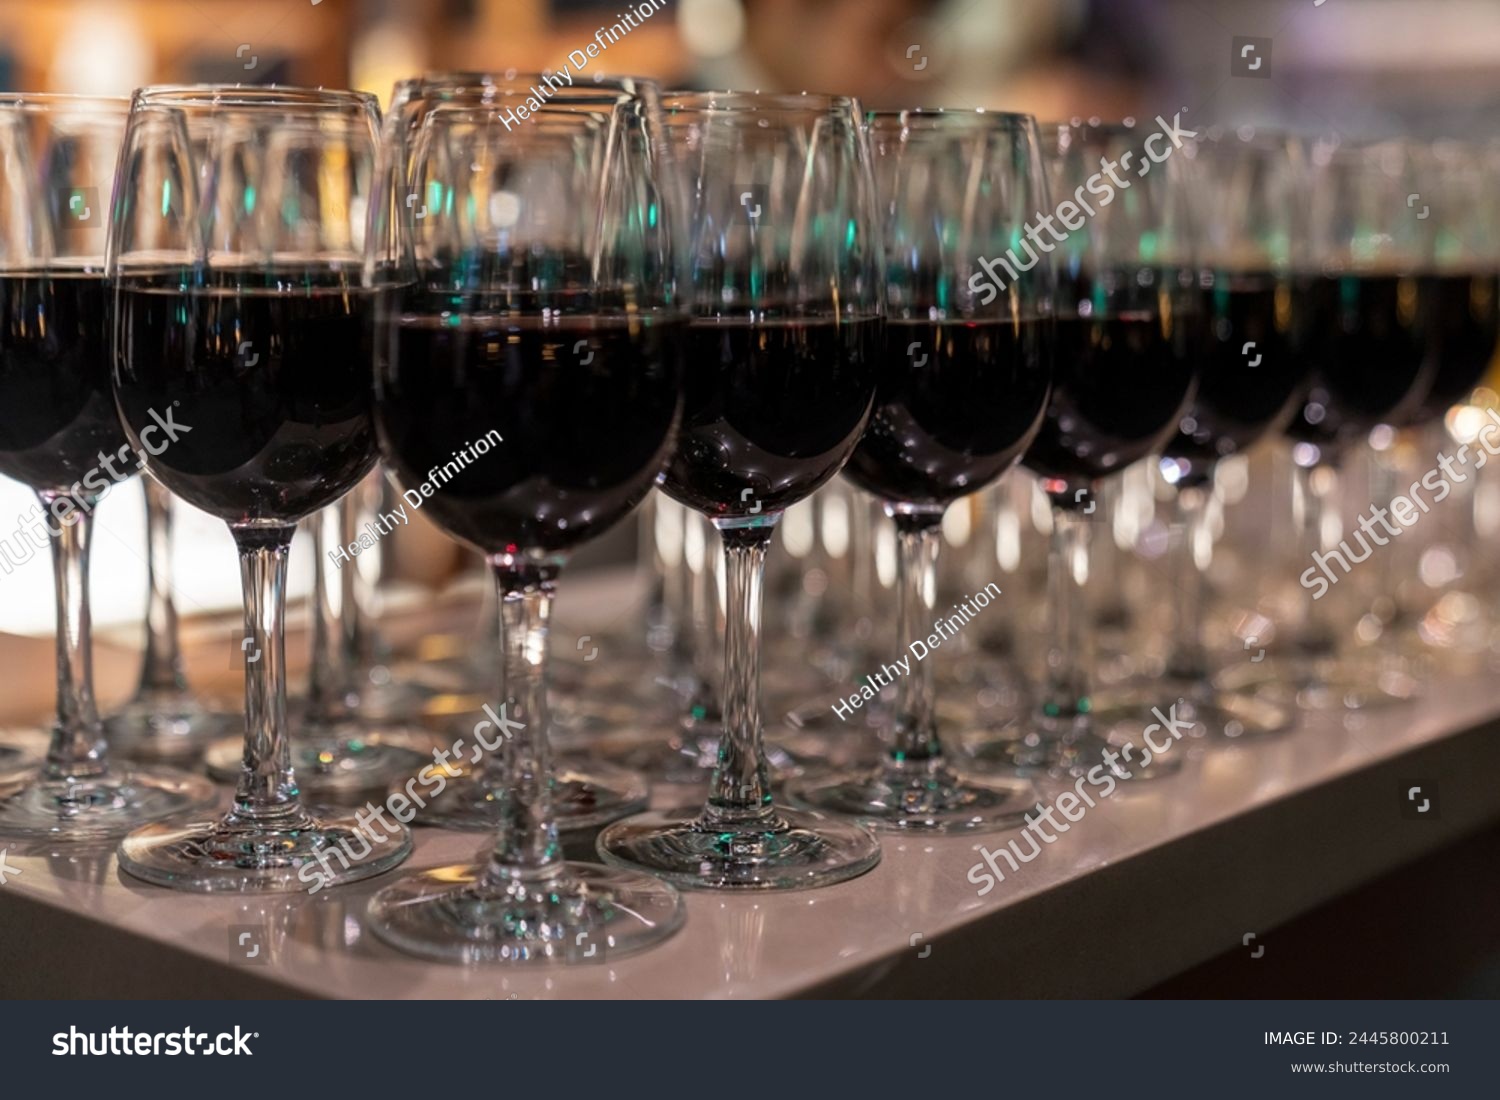 Wine glasses filled with red wine arranged and presented on a table top for self-service by party guests. Shallow depth-of-field image. A glass of red wine is on the table. Glasses of wine.  #2445800211